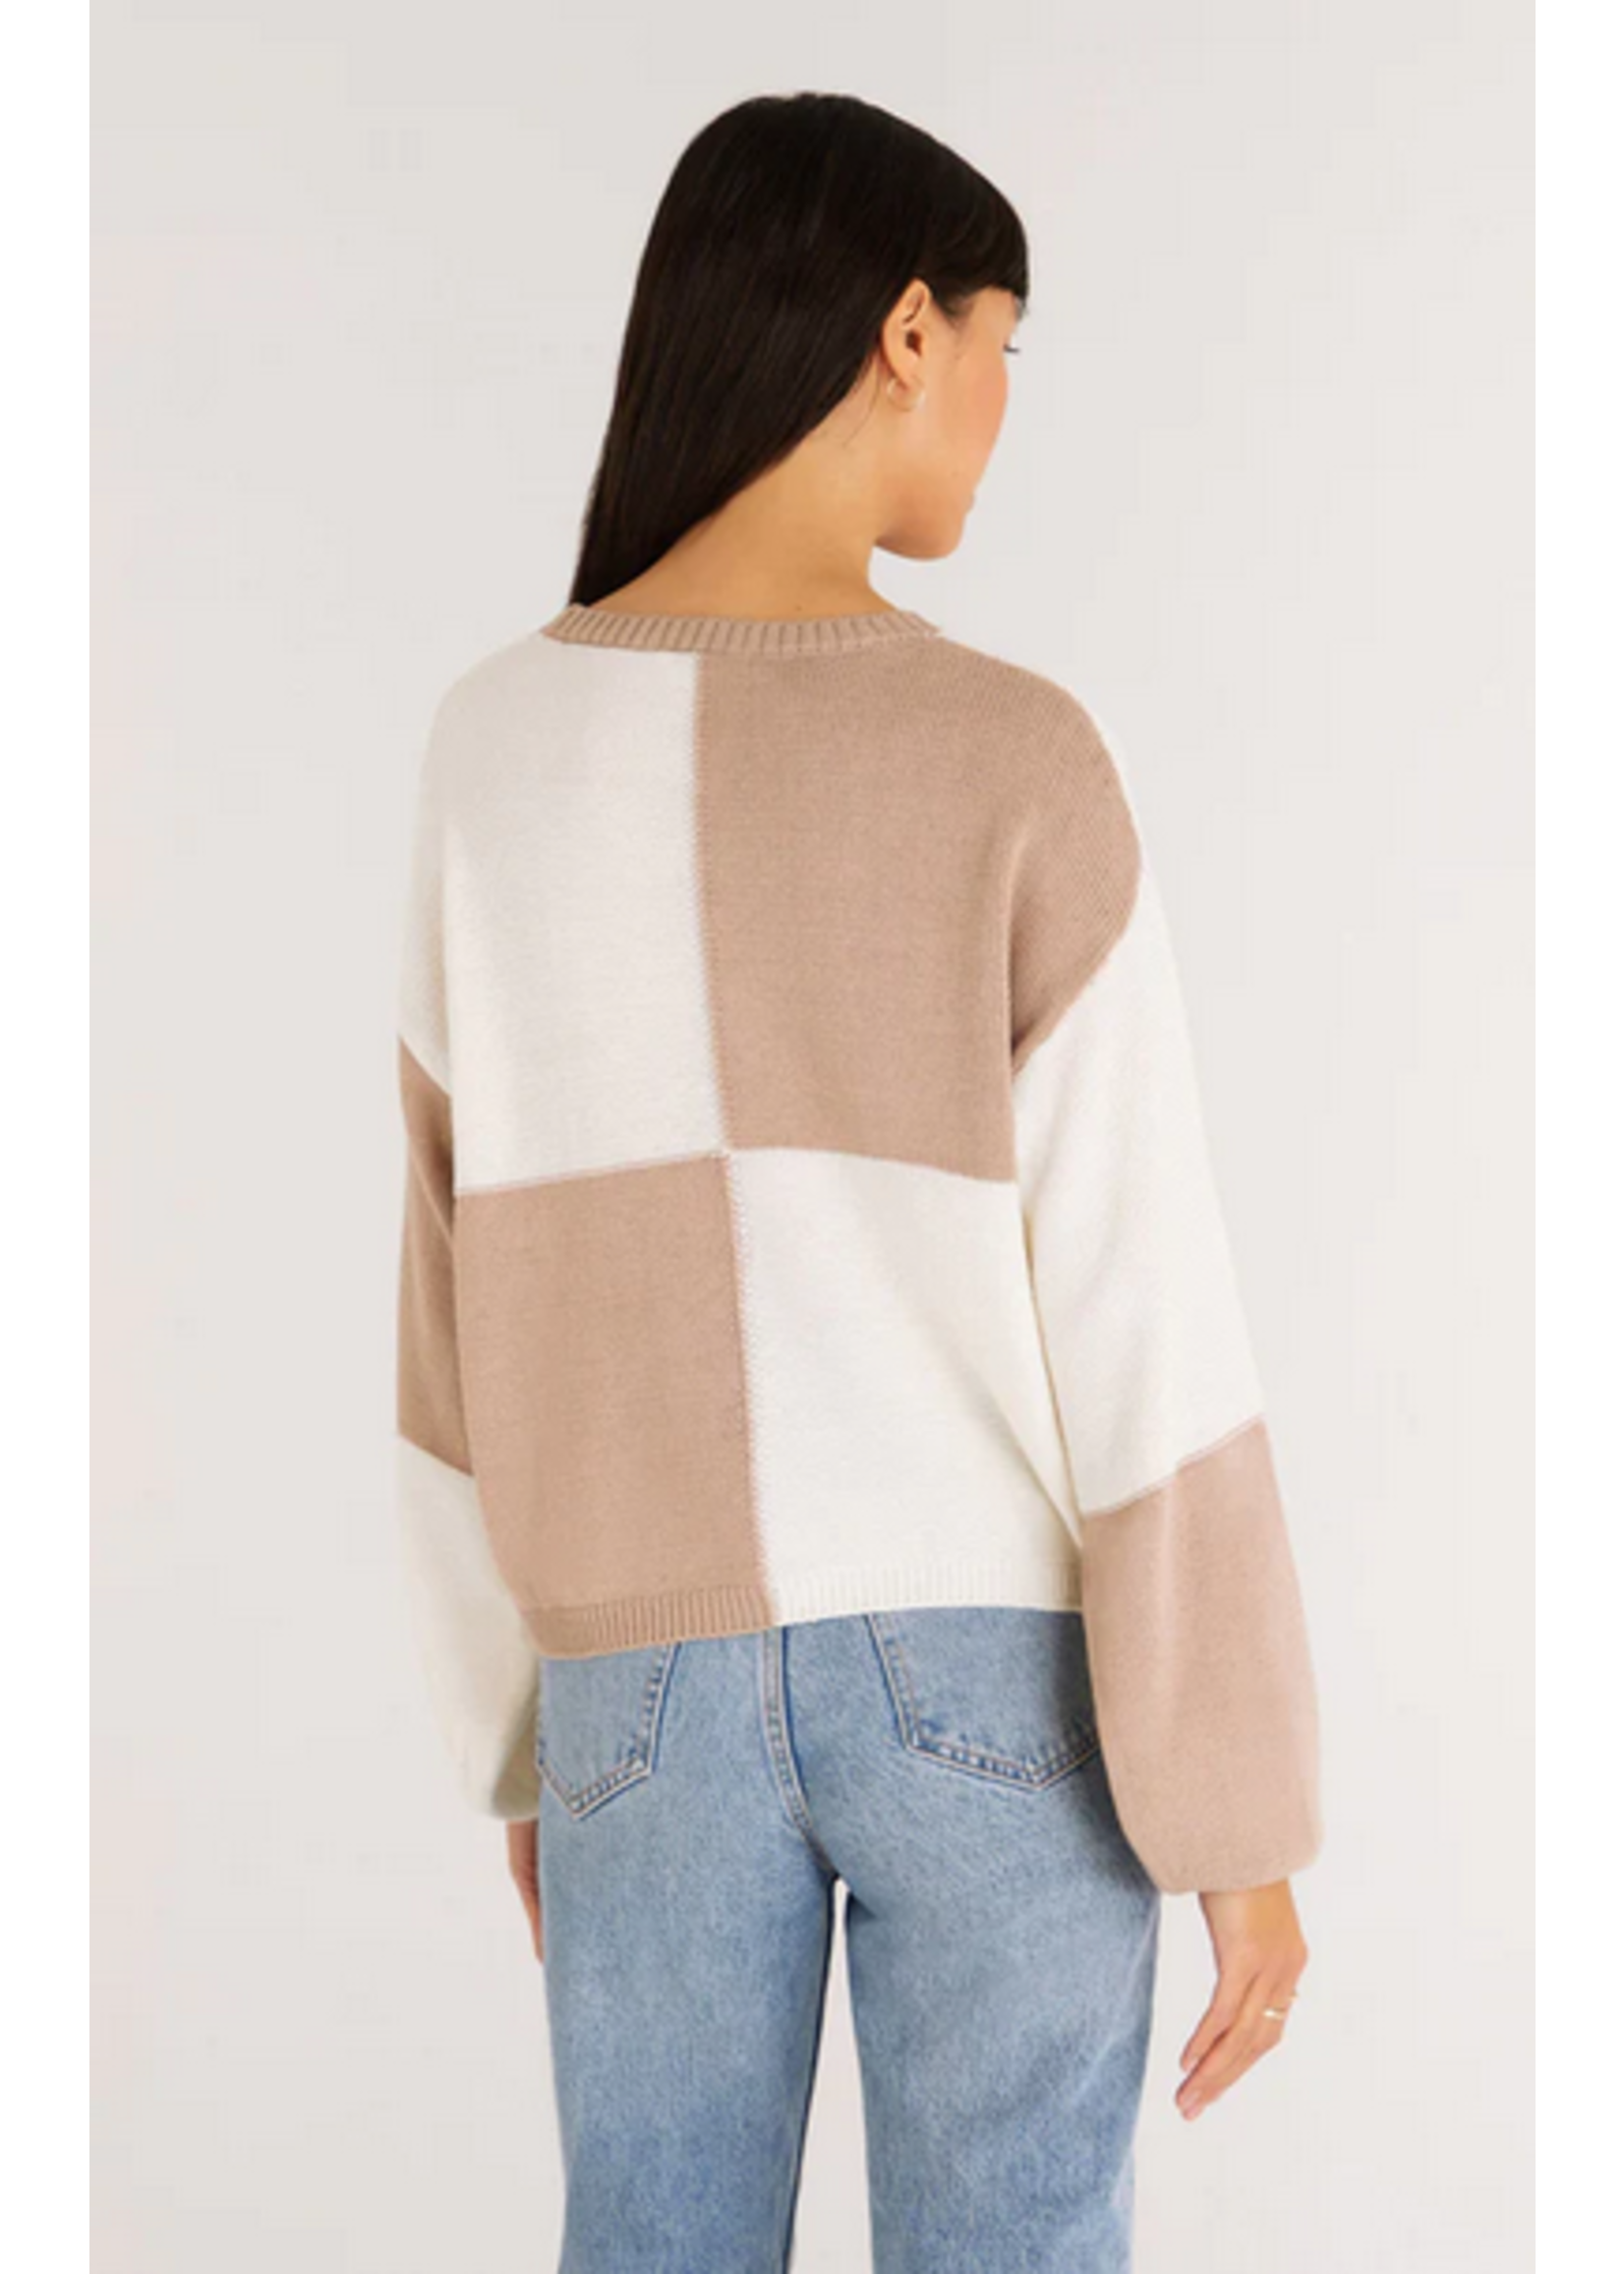 Z Supply Solange Check Sweater